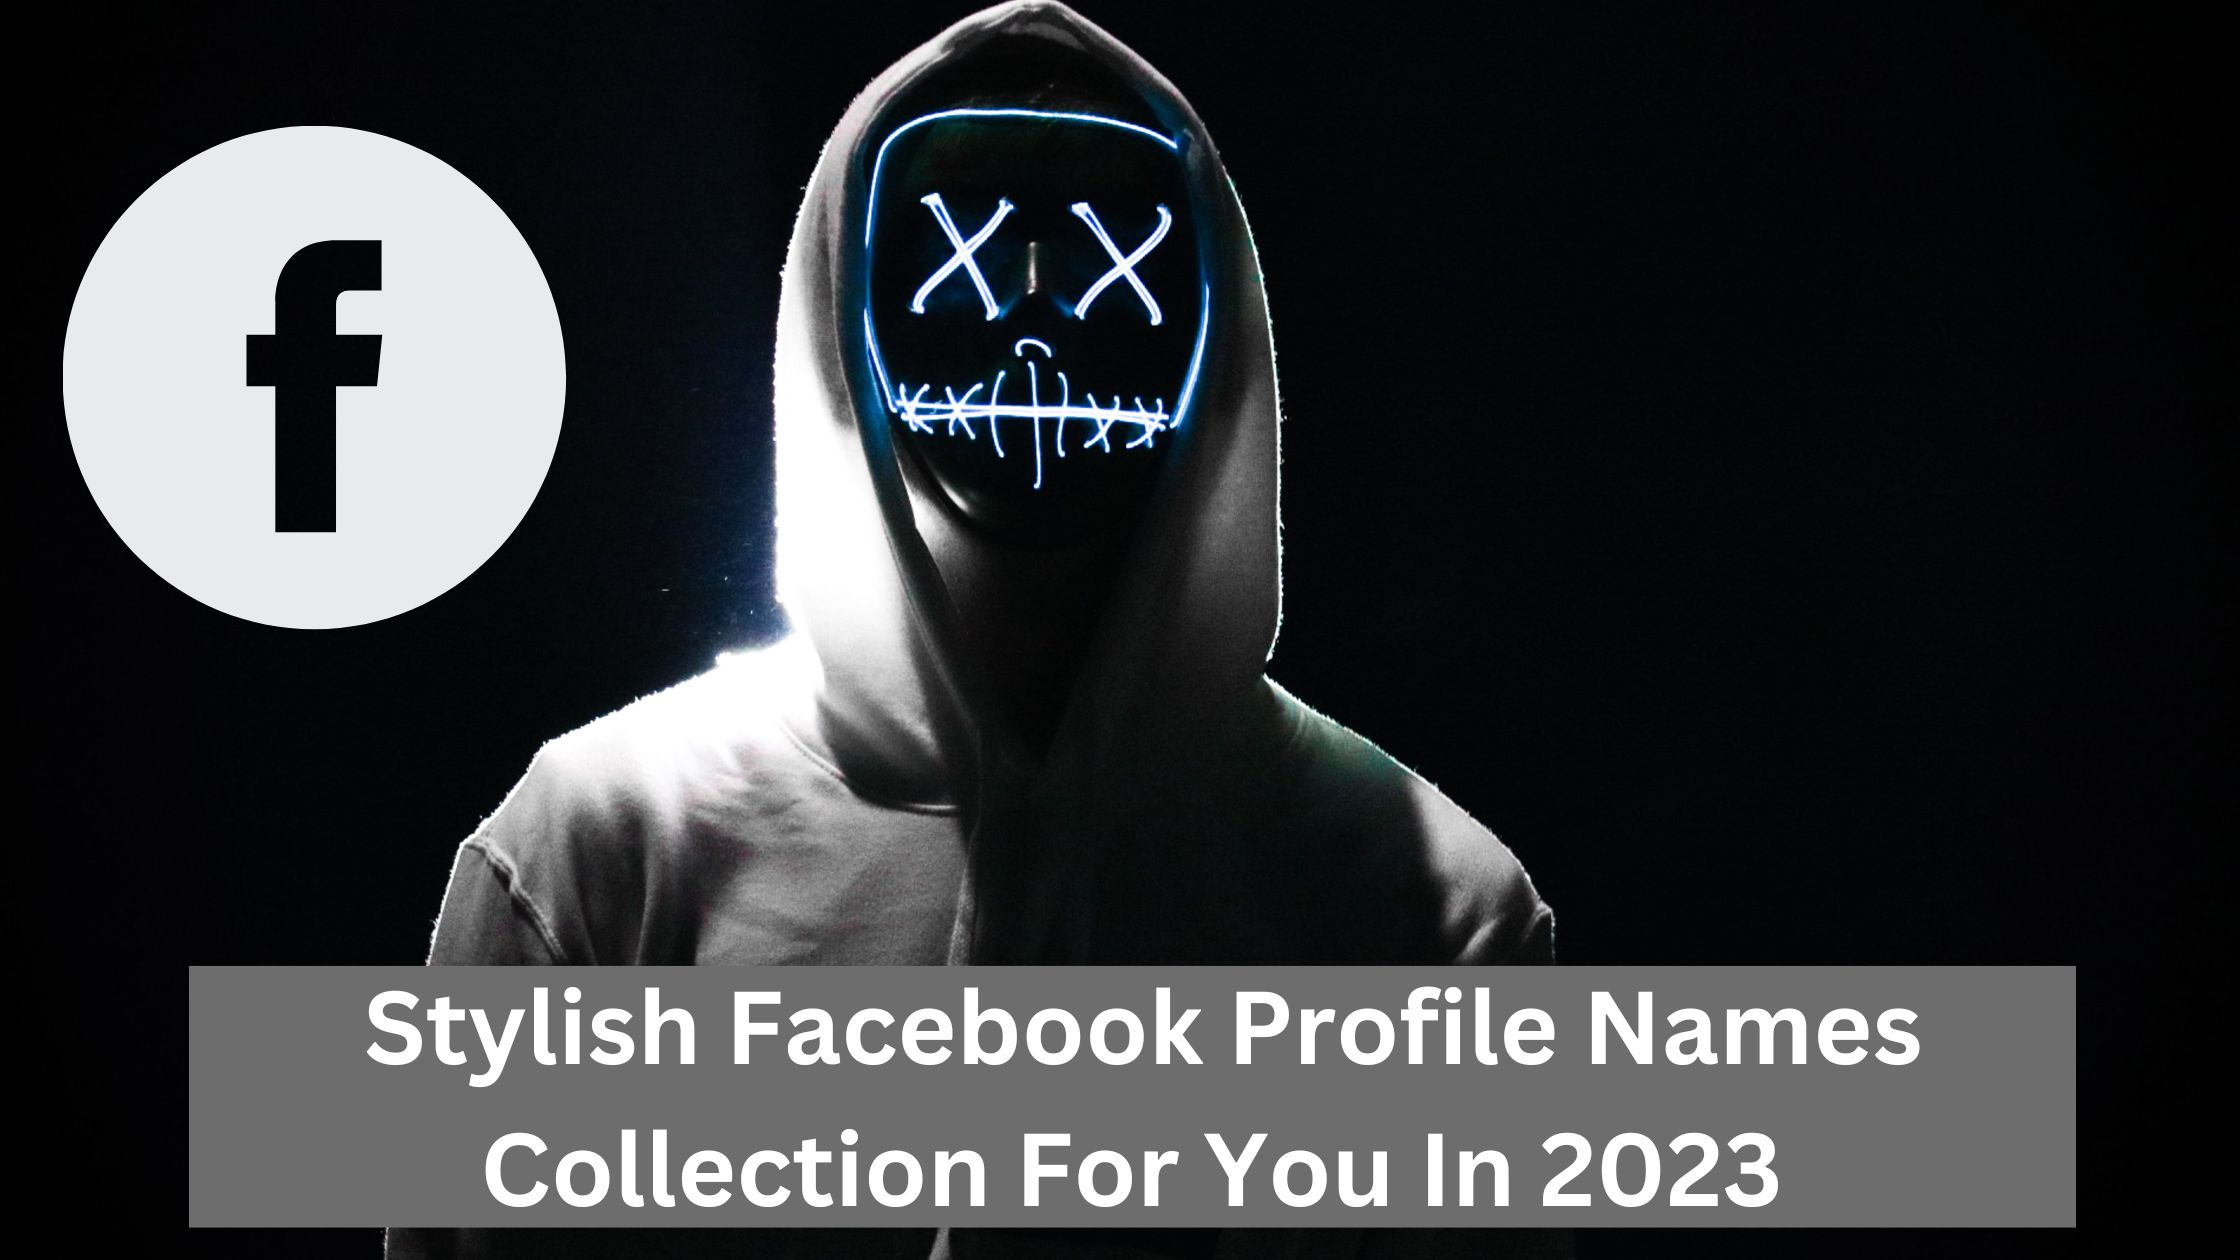 Stylish Facebook Profile Names Collection For You In 2023